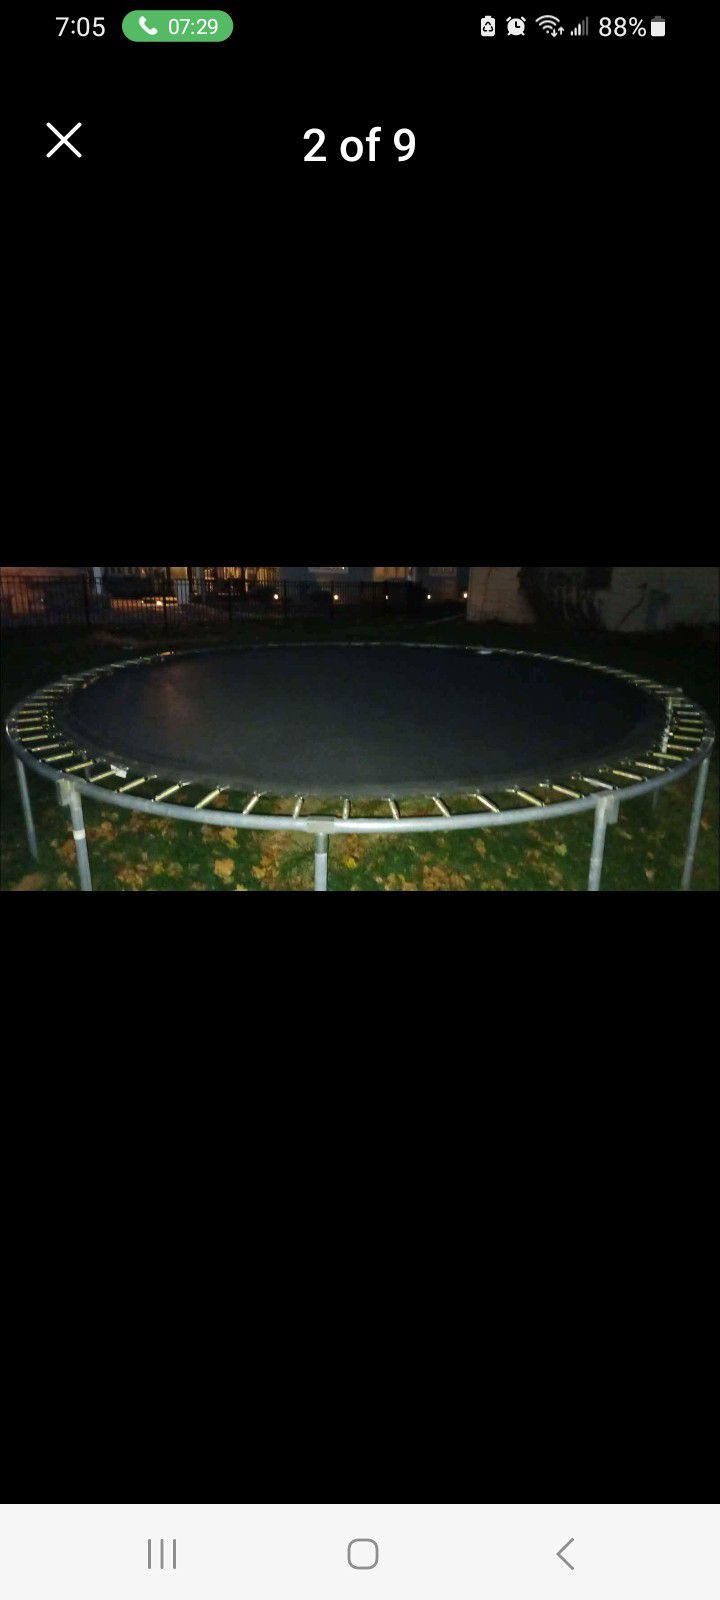 12 Ft Round Trampoline. Used/Good Condition